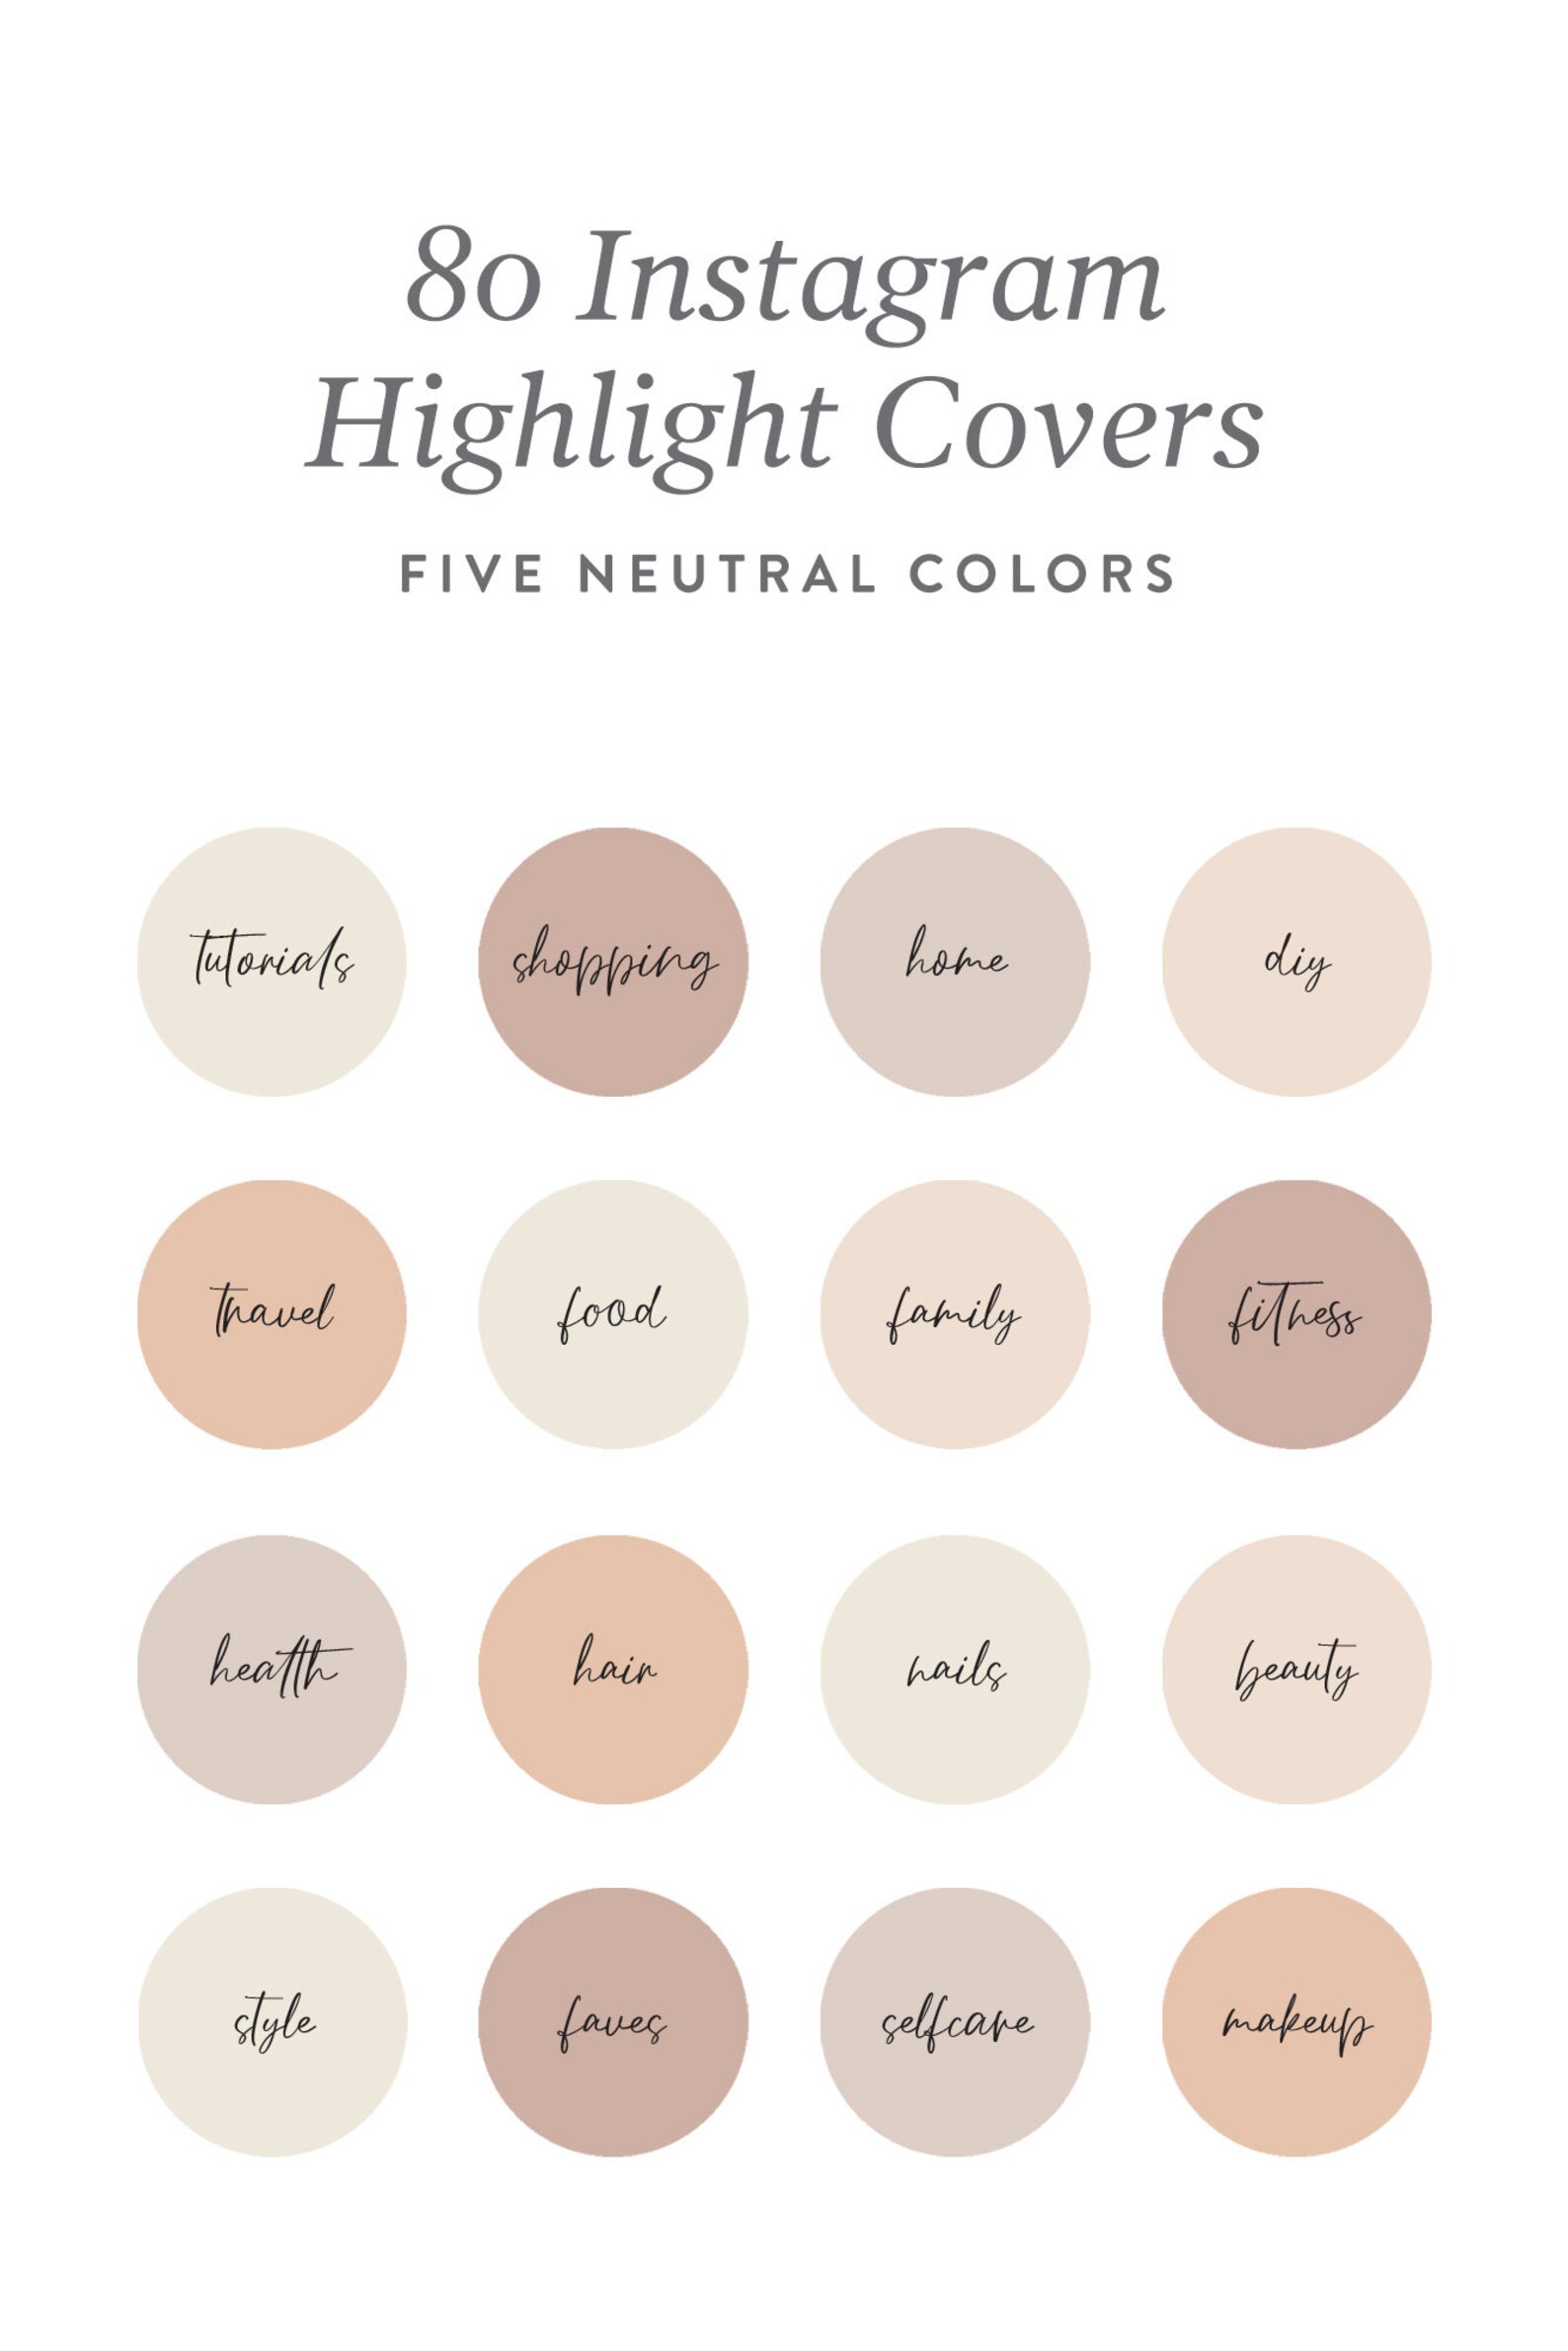 Instagram Highlight Covers 80 Handwritten Highlight Covers in 5 Colors ...